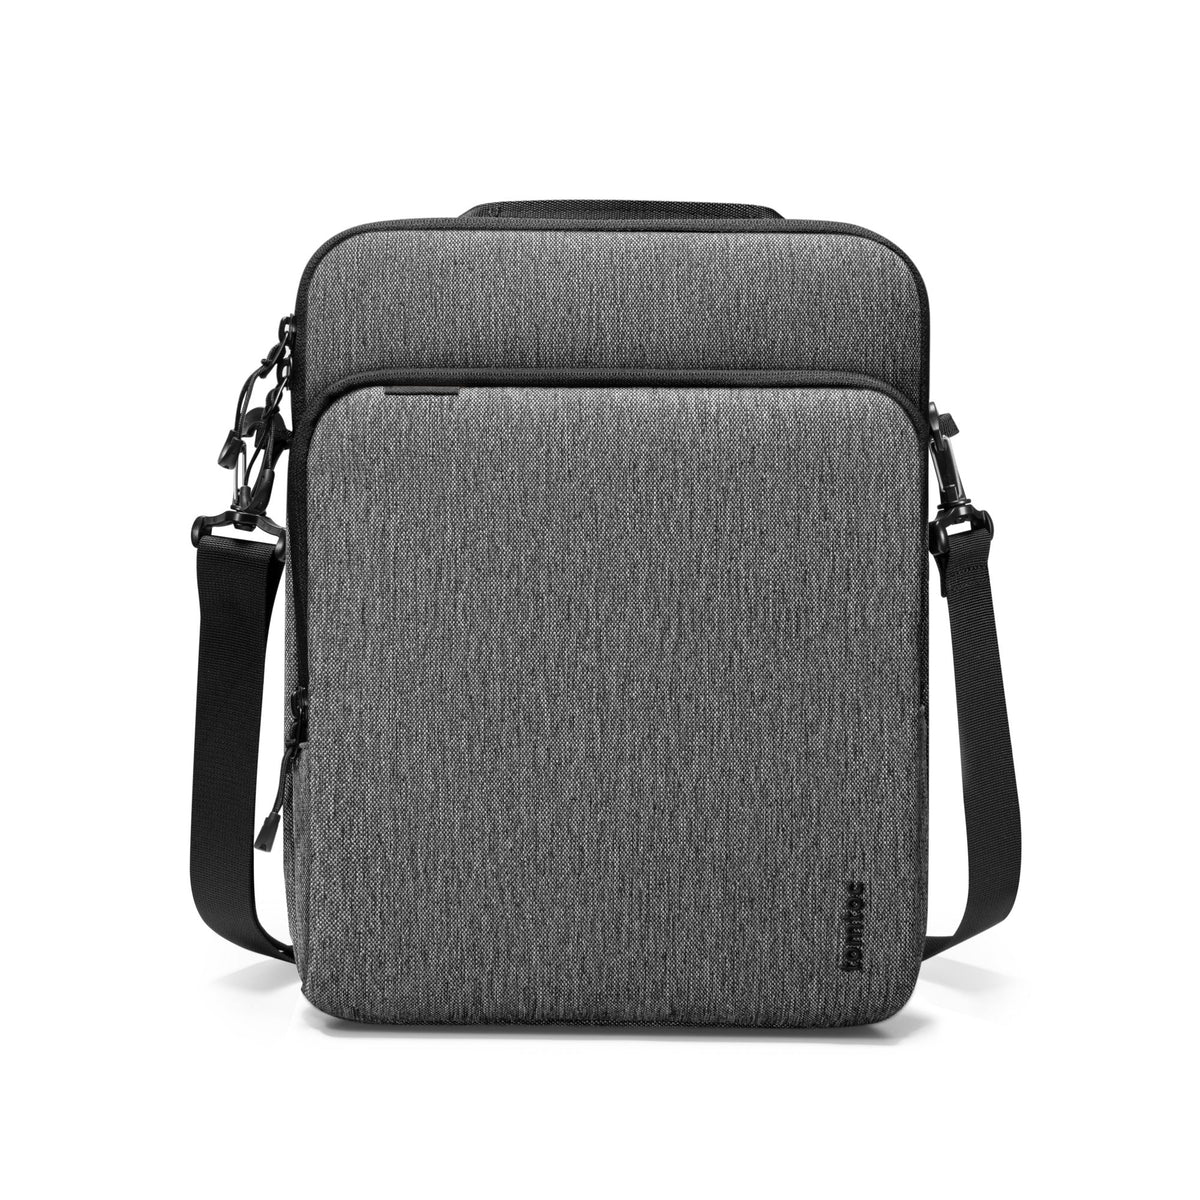 primary_DefenderACE-H13 Tablet Shoulder Bag For 12.9'' iPad Pro | Gray